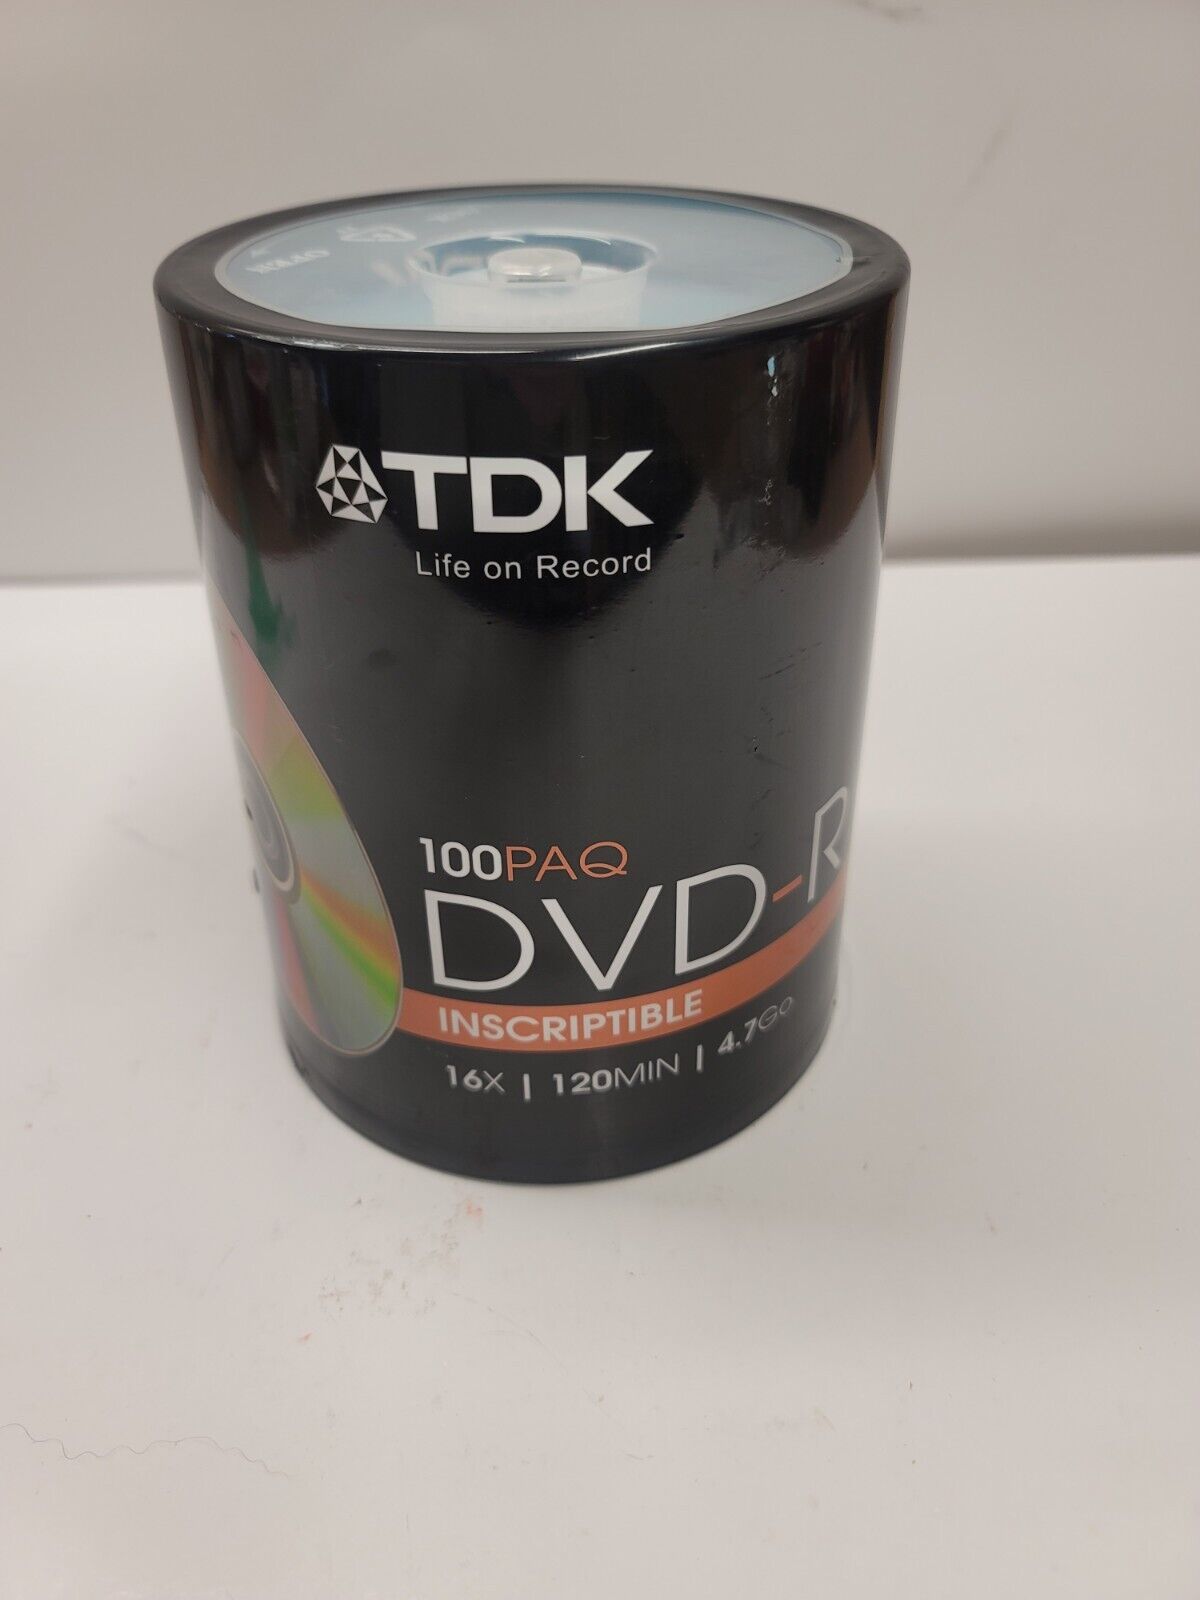 TDK DVD-R 1-16x speed 4.7 GB Recordable Discs Disks 100 Pack Spindle NEW SEALED